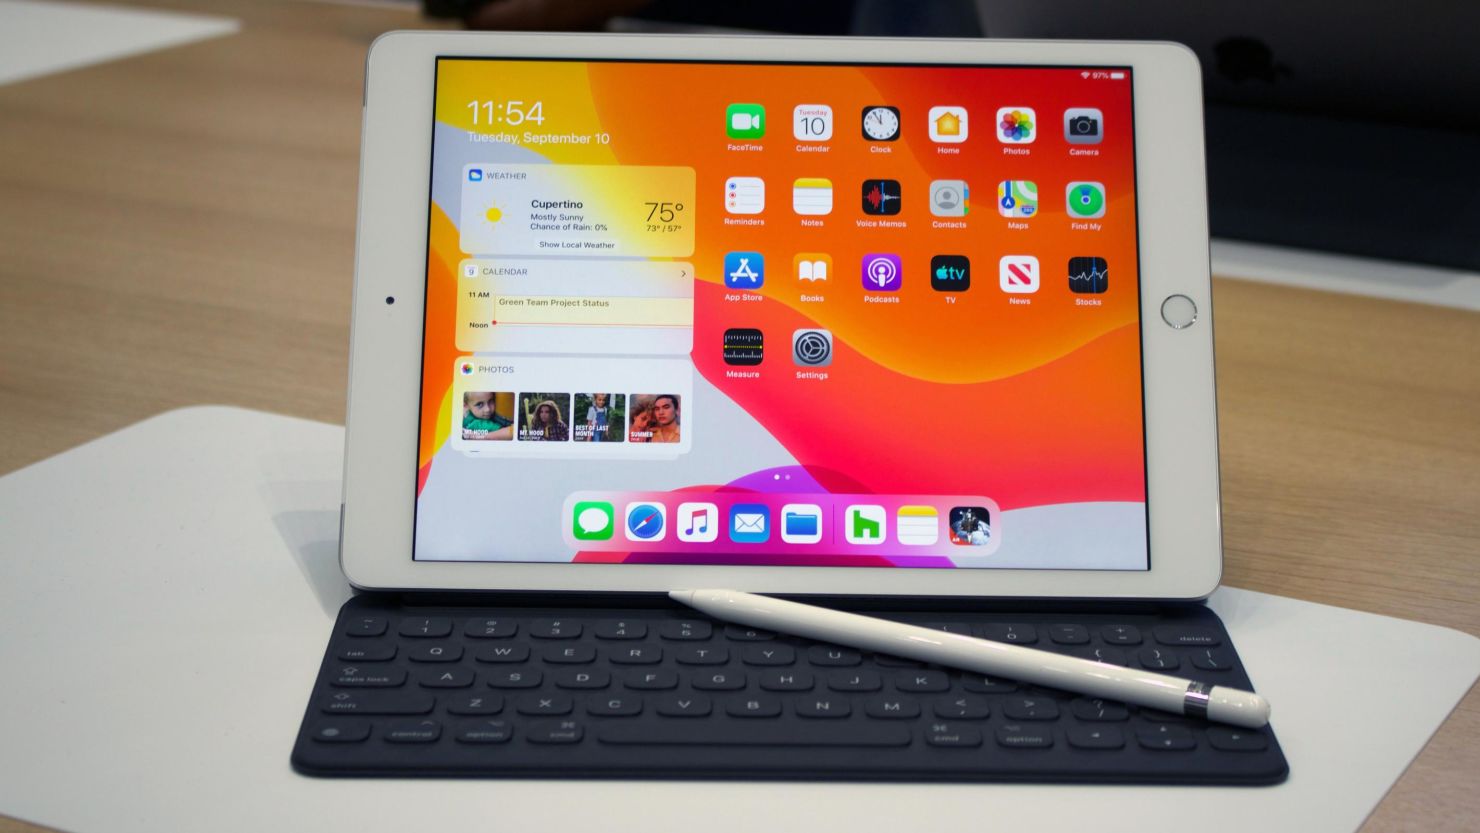 7th Gen iPad 10.2 Hands-On: The new entry level iPad brings more value |  CNN Underscored